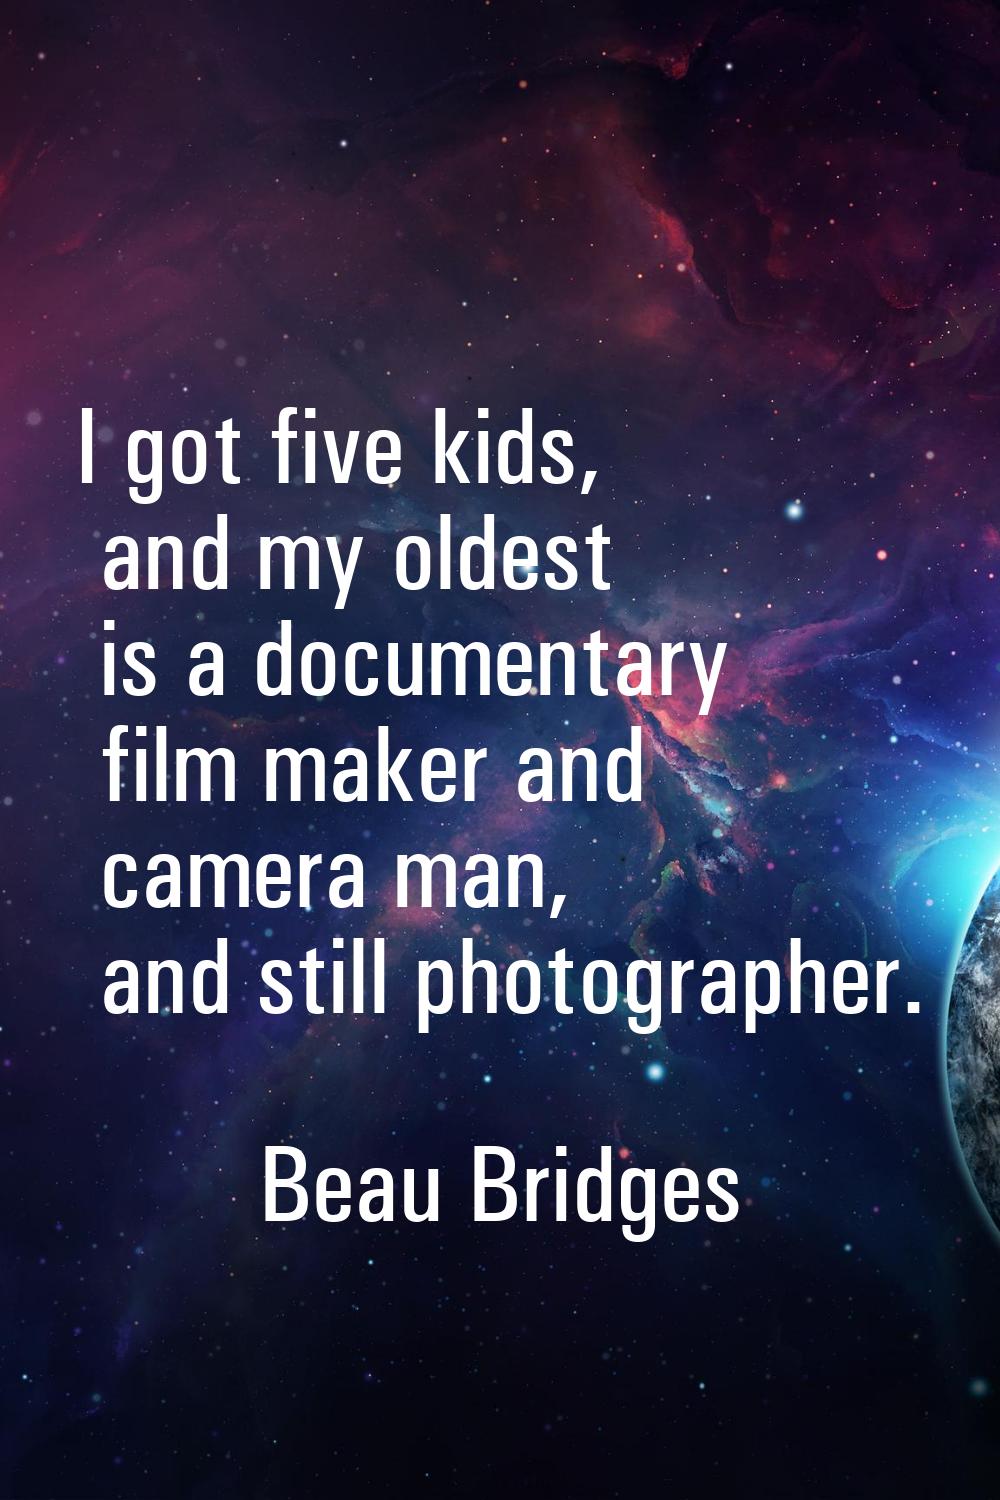 I got five kids, and my oldest is a documentary film maker and camera man, and still photographer.